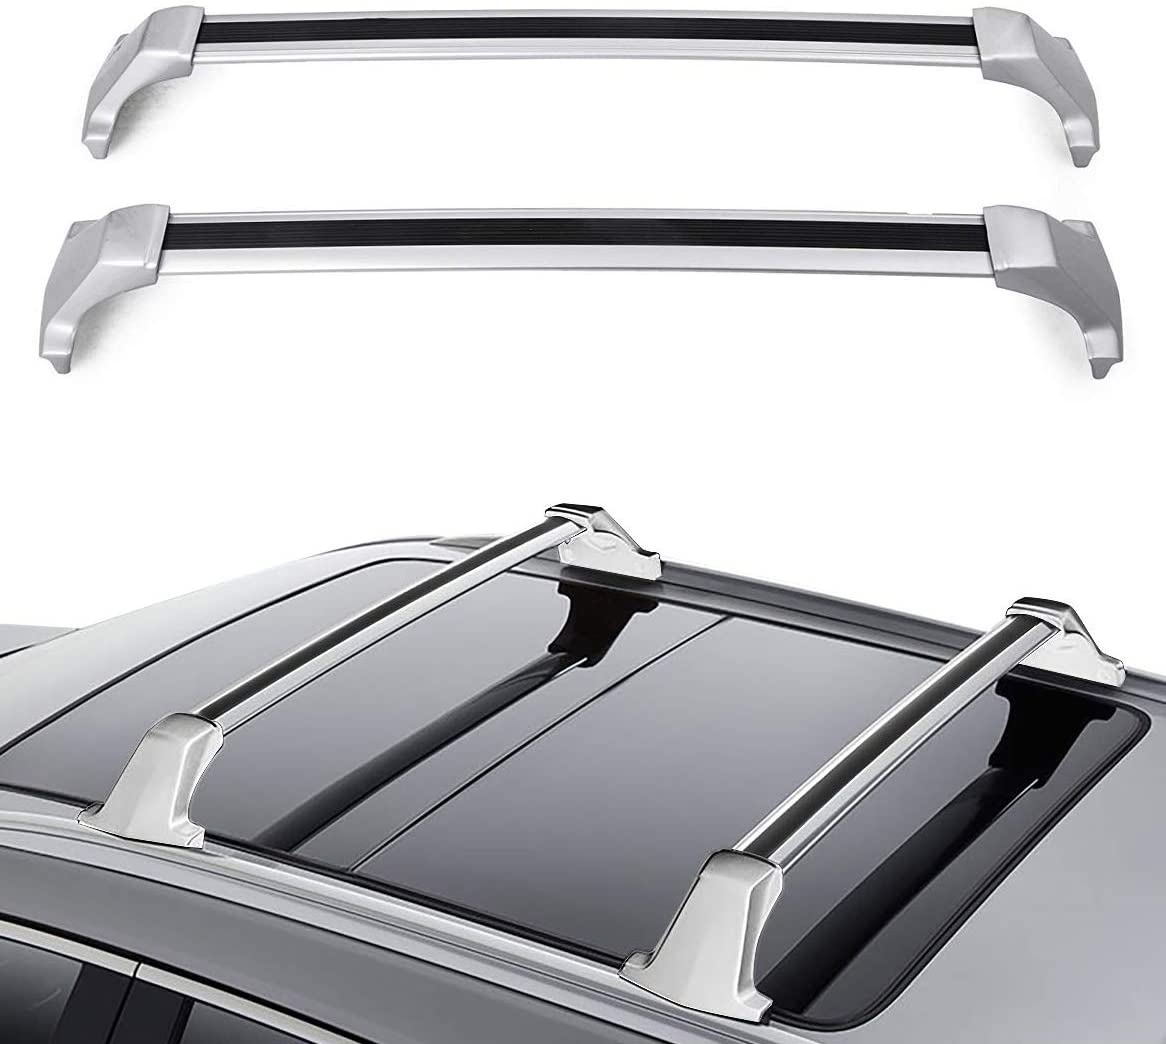 ROSY PIXEL Roof Rack Cross Bars for Cadillac XT5 2017-2020 2021 Sliver Baggage Luggage Cargo